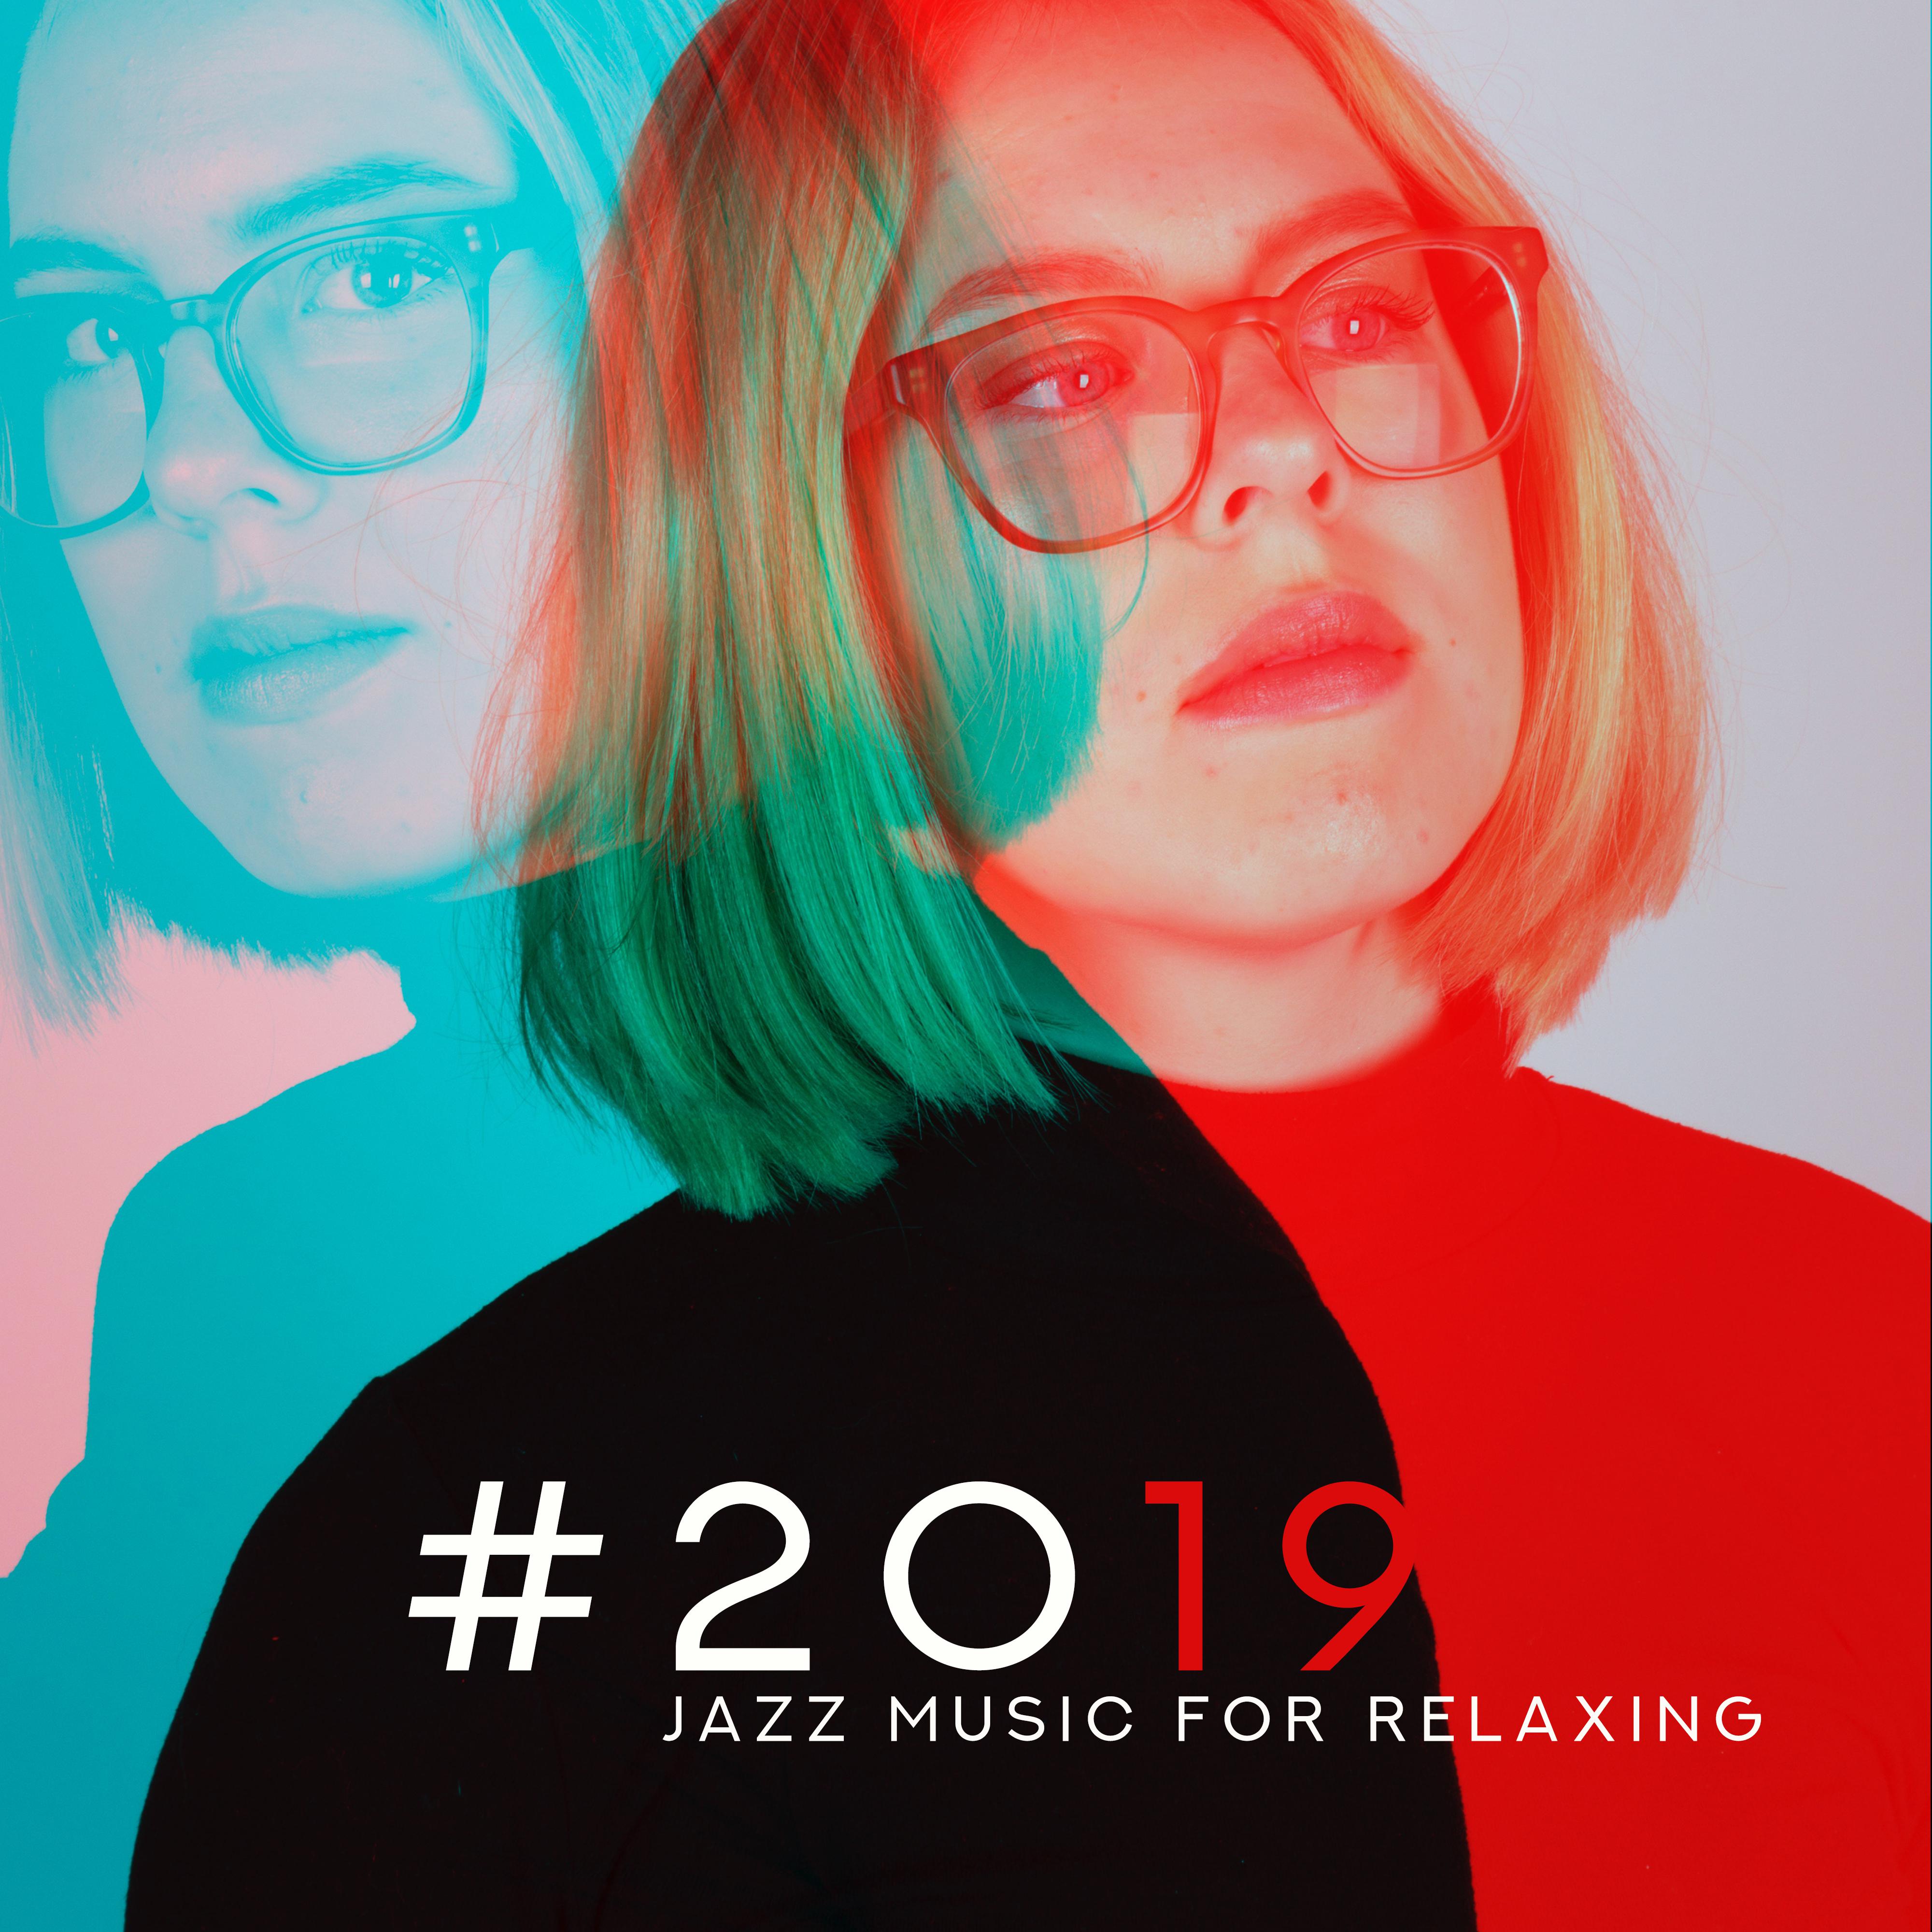 2019 Jazz Music for Relaxing  Instrumental Jazz Music Ambient, Relax Zone, Jazz Lounge, Background Jazz Relaxation, Reduce Stress